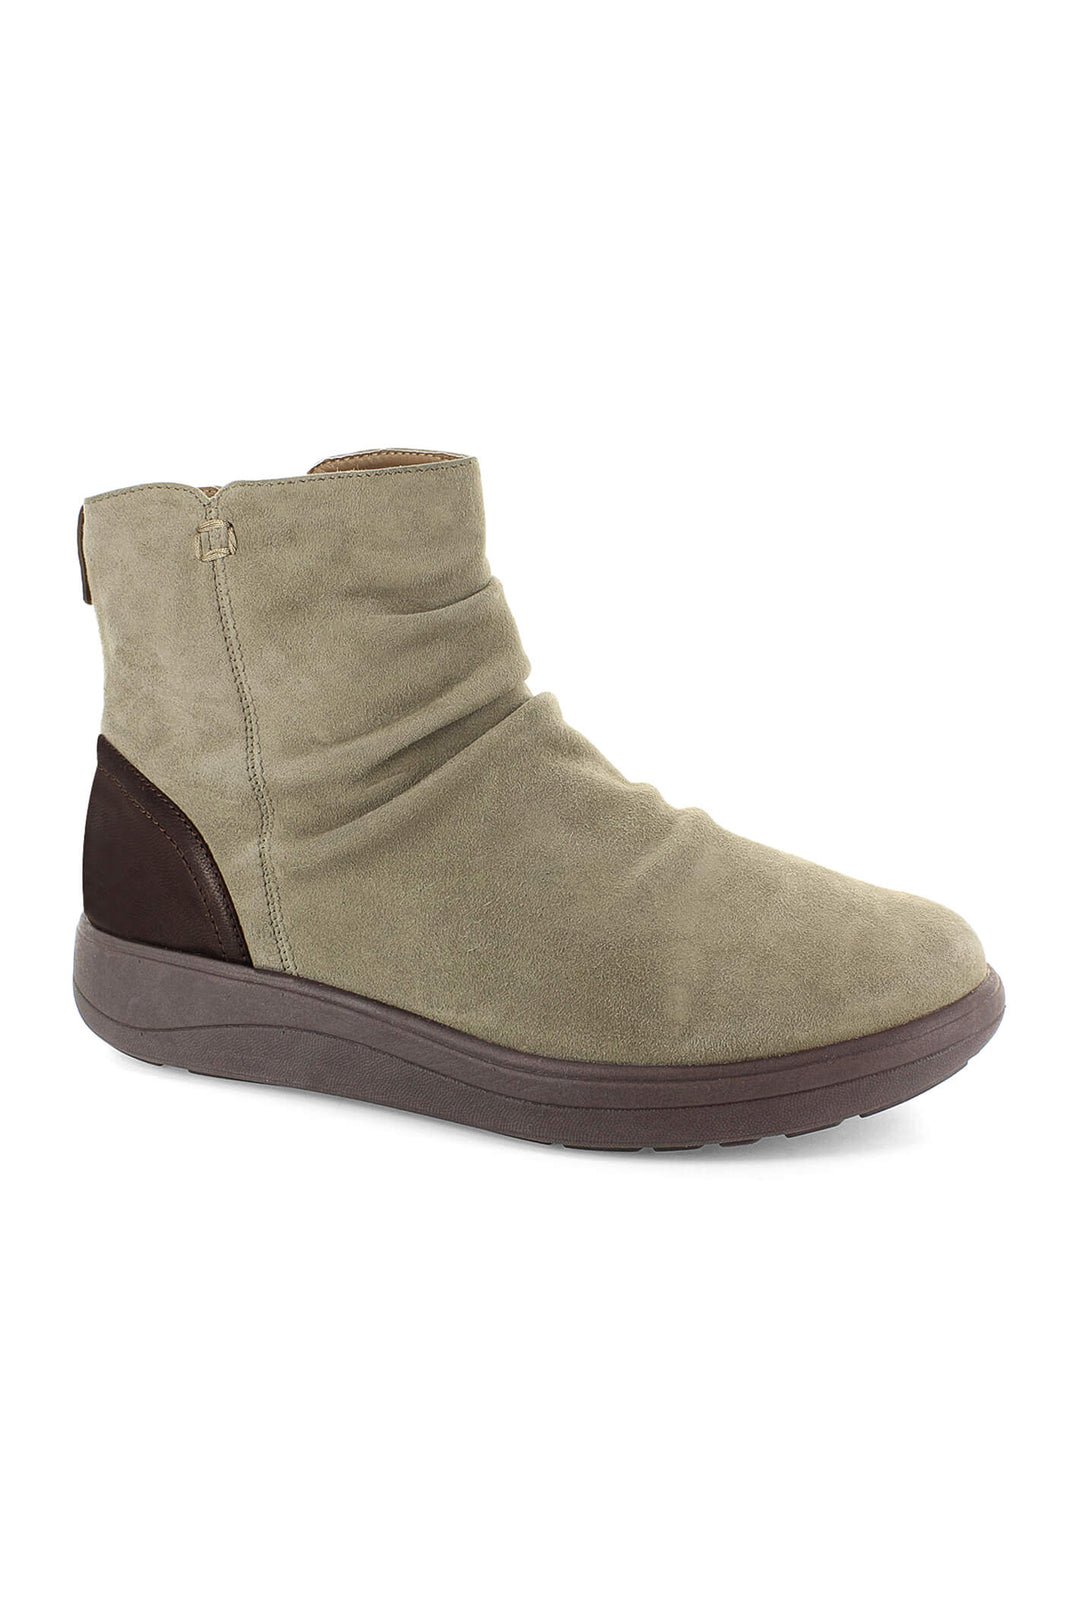 Strive Tempo Taupe Brown Zip Up Leather Boots - Shirley Allum Boutique